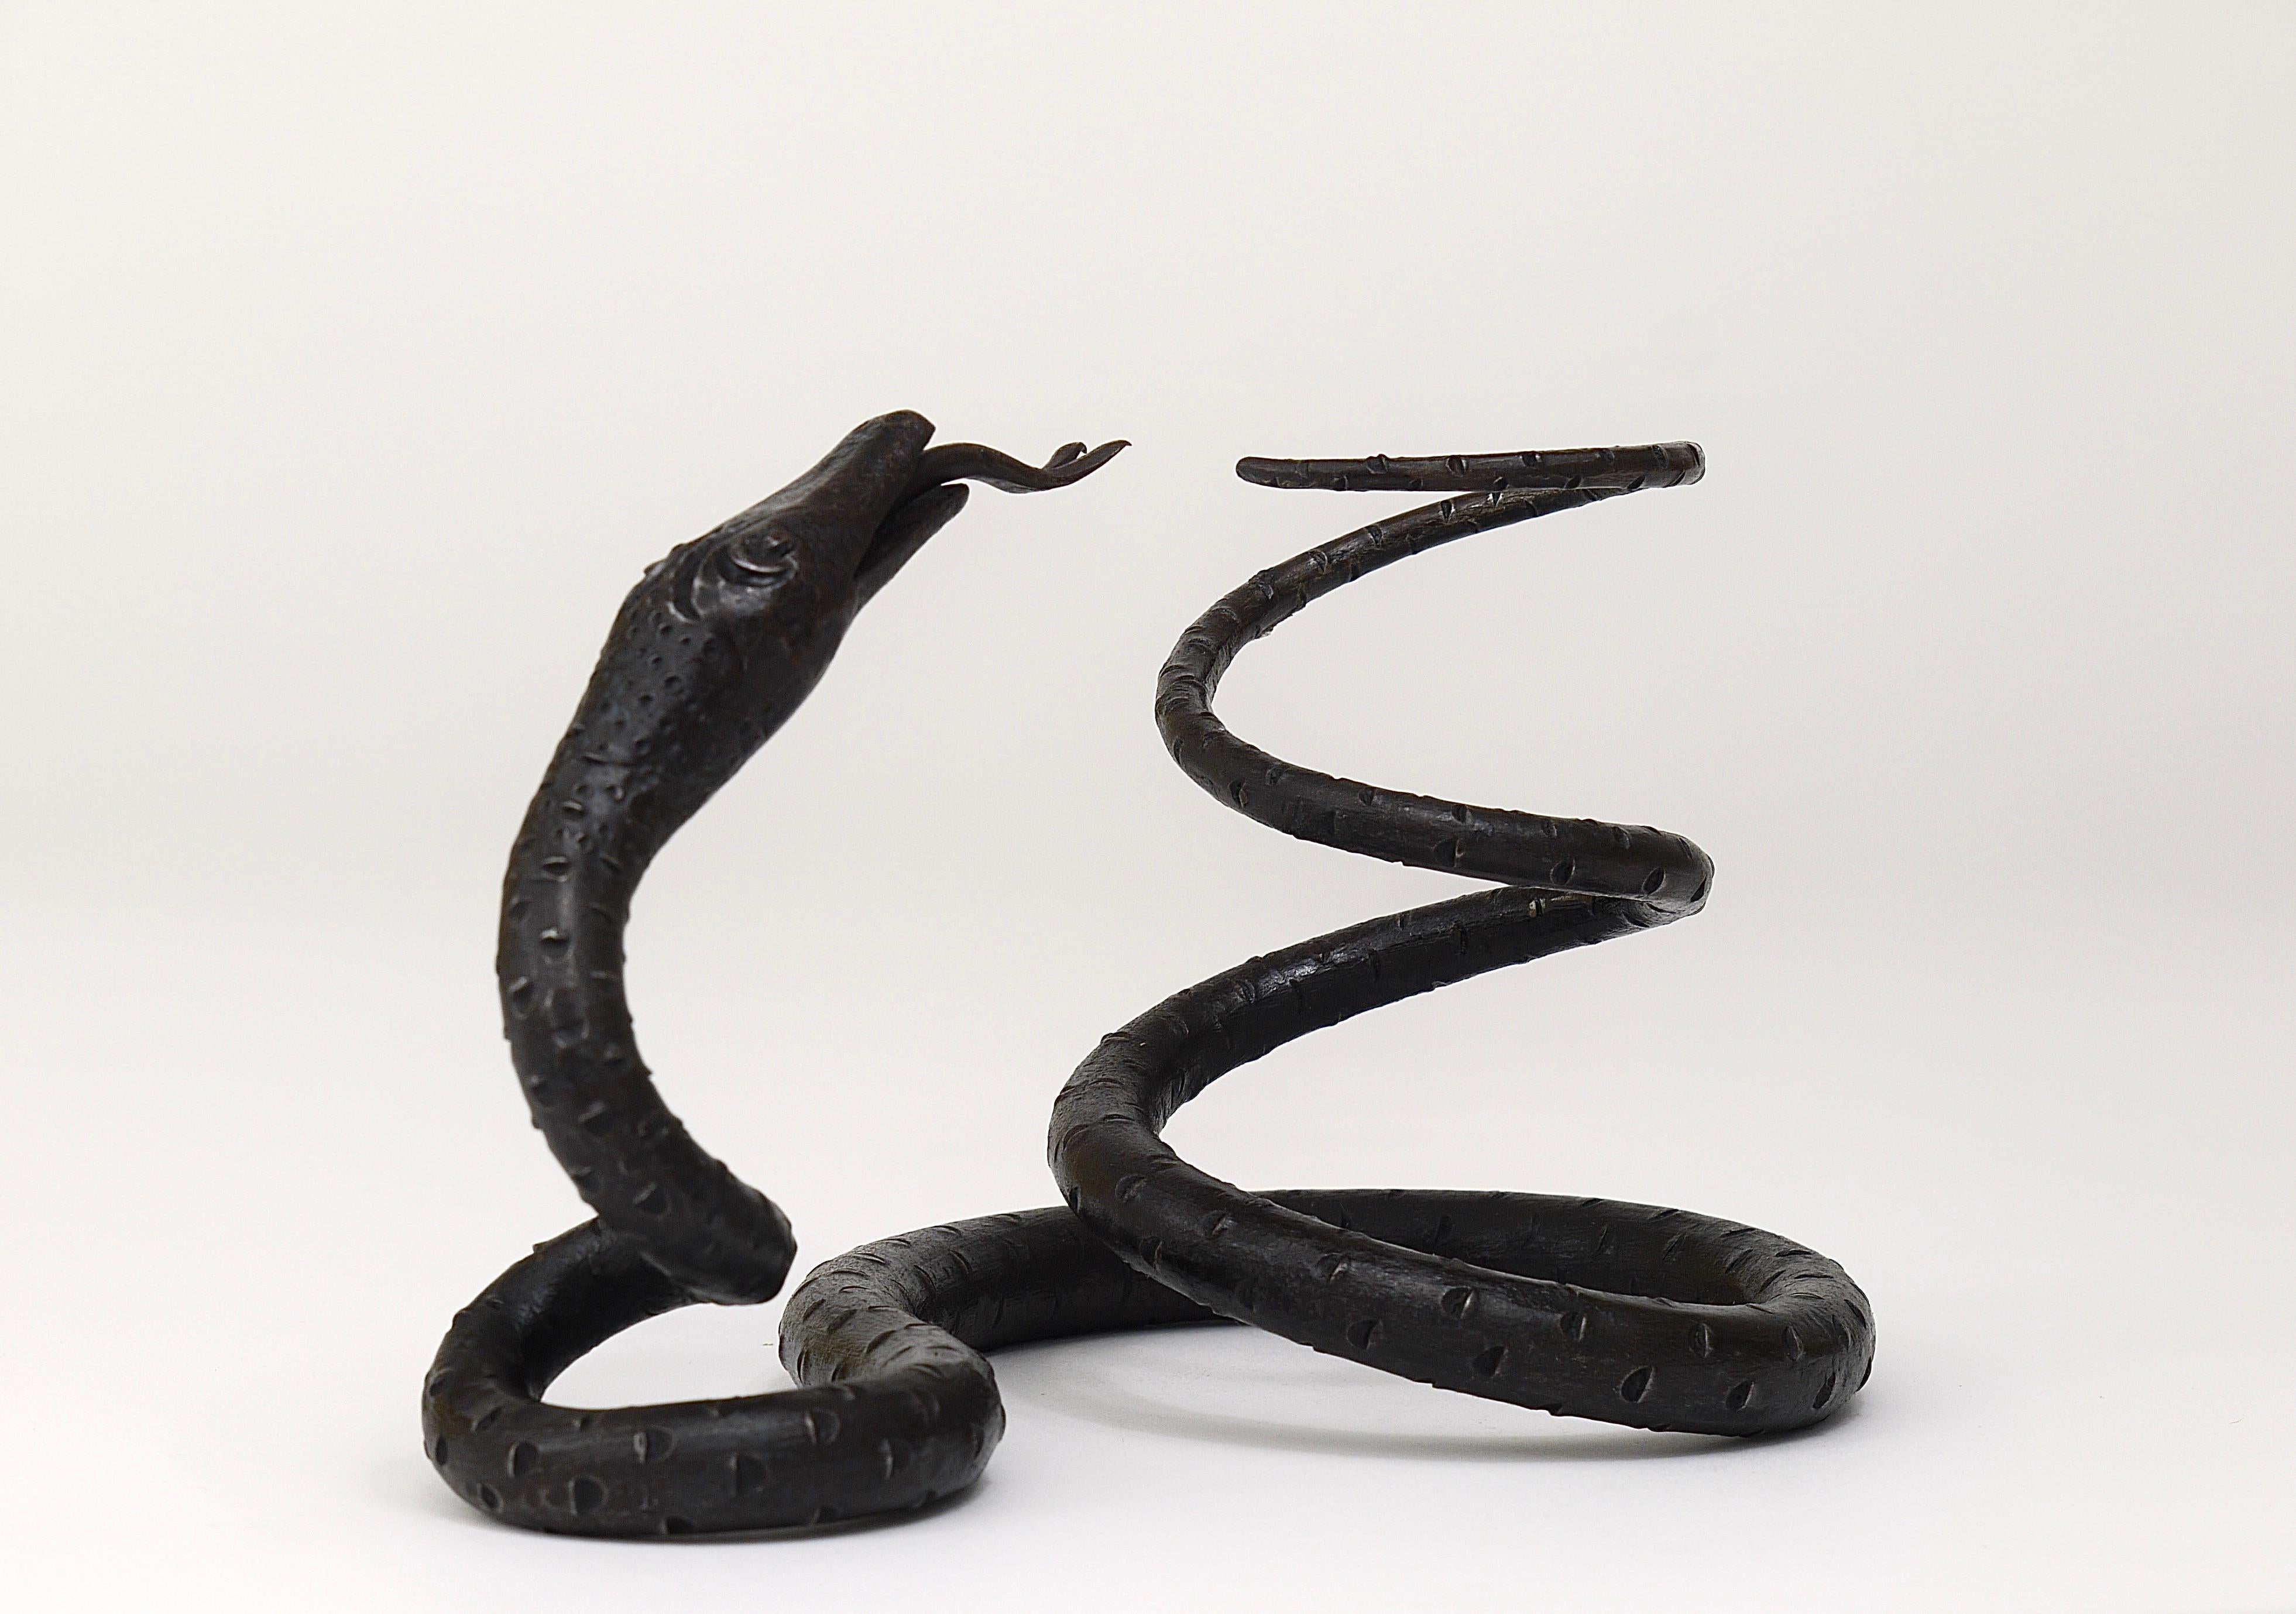 Edgar Brandt Style Hand Forged Iron Snake or Serpent Sculpture, Austria, 1920s For Sale 4